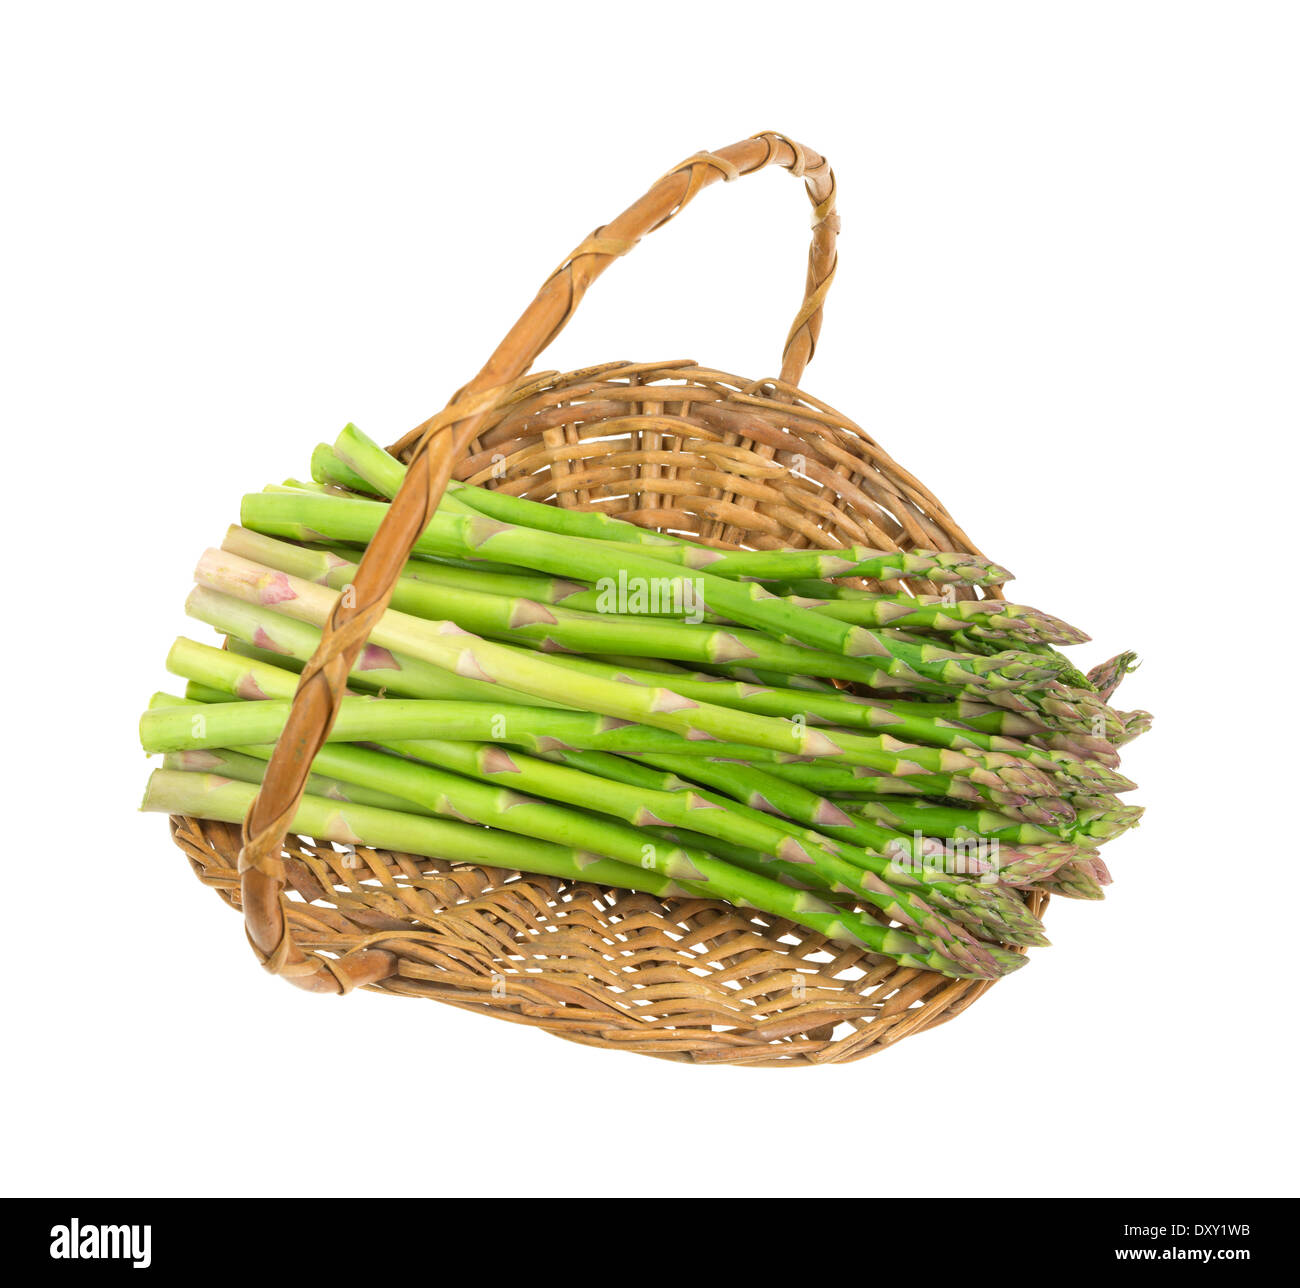 Several stalks of fresh asparagus in an old wicker basket. Stock Photo